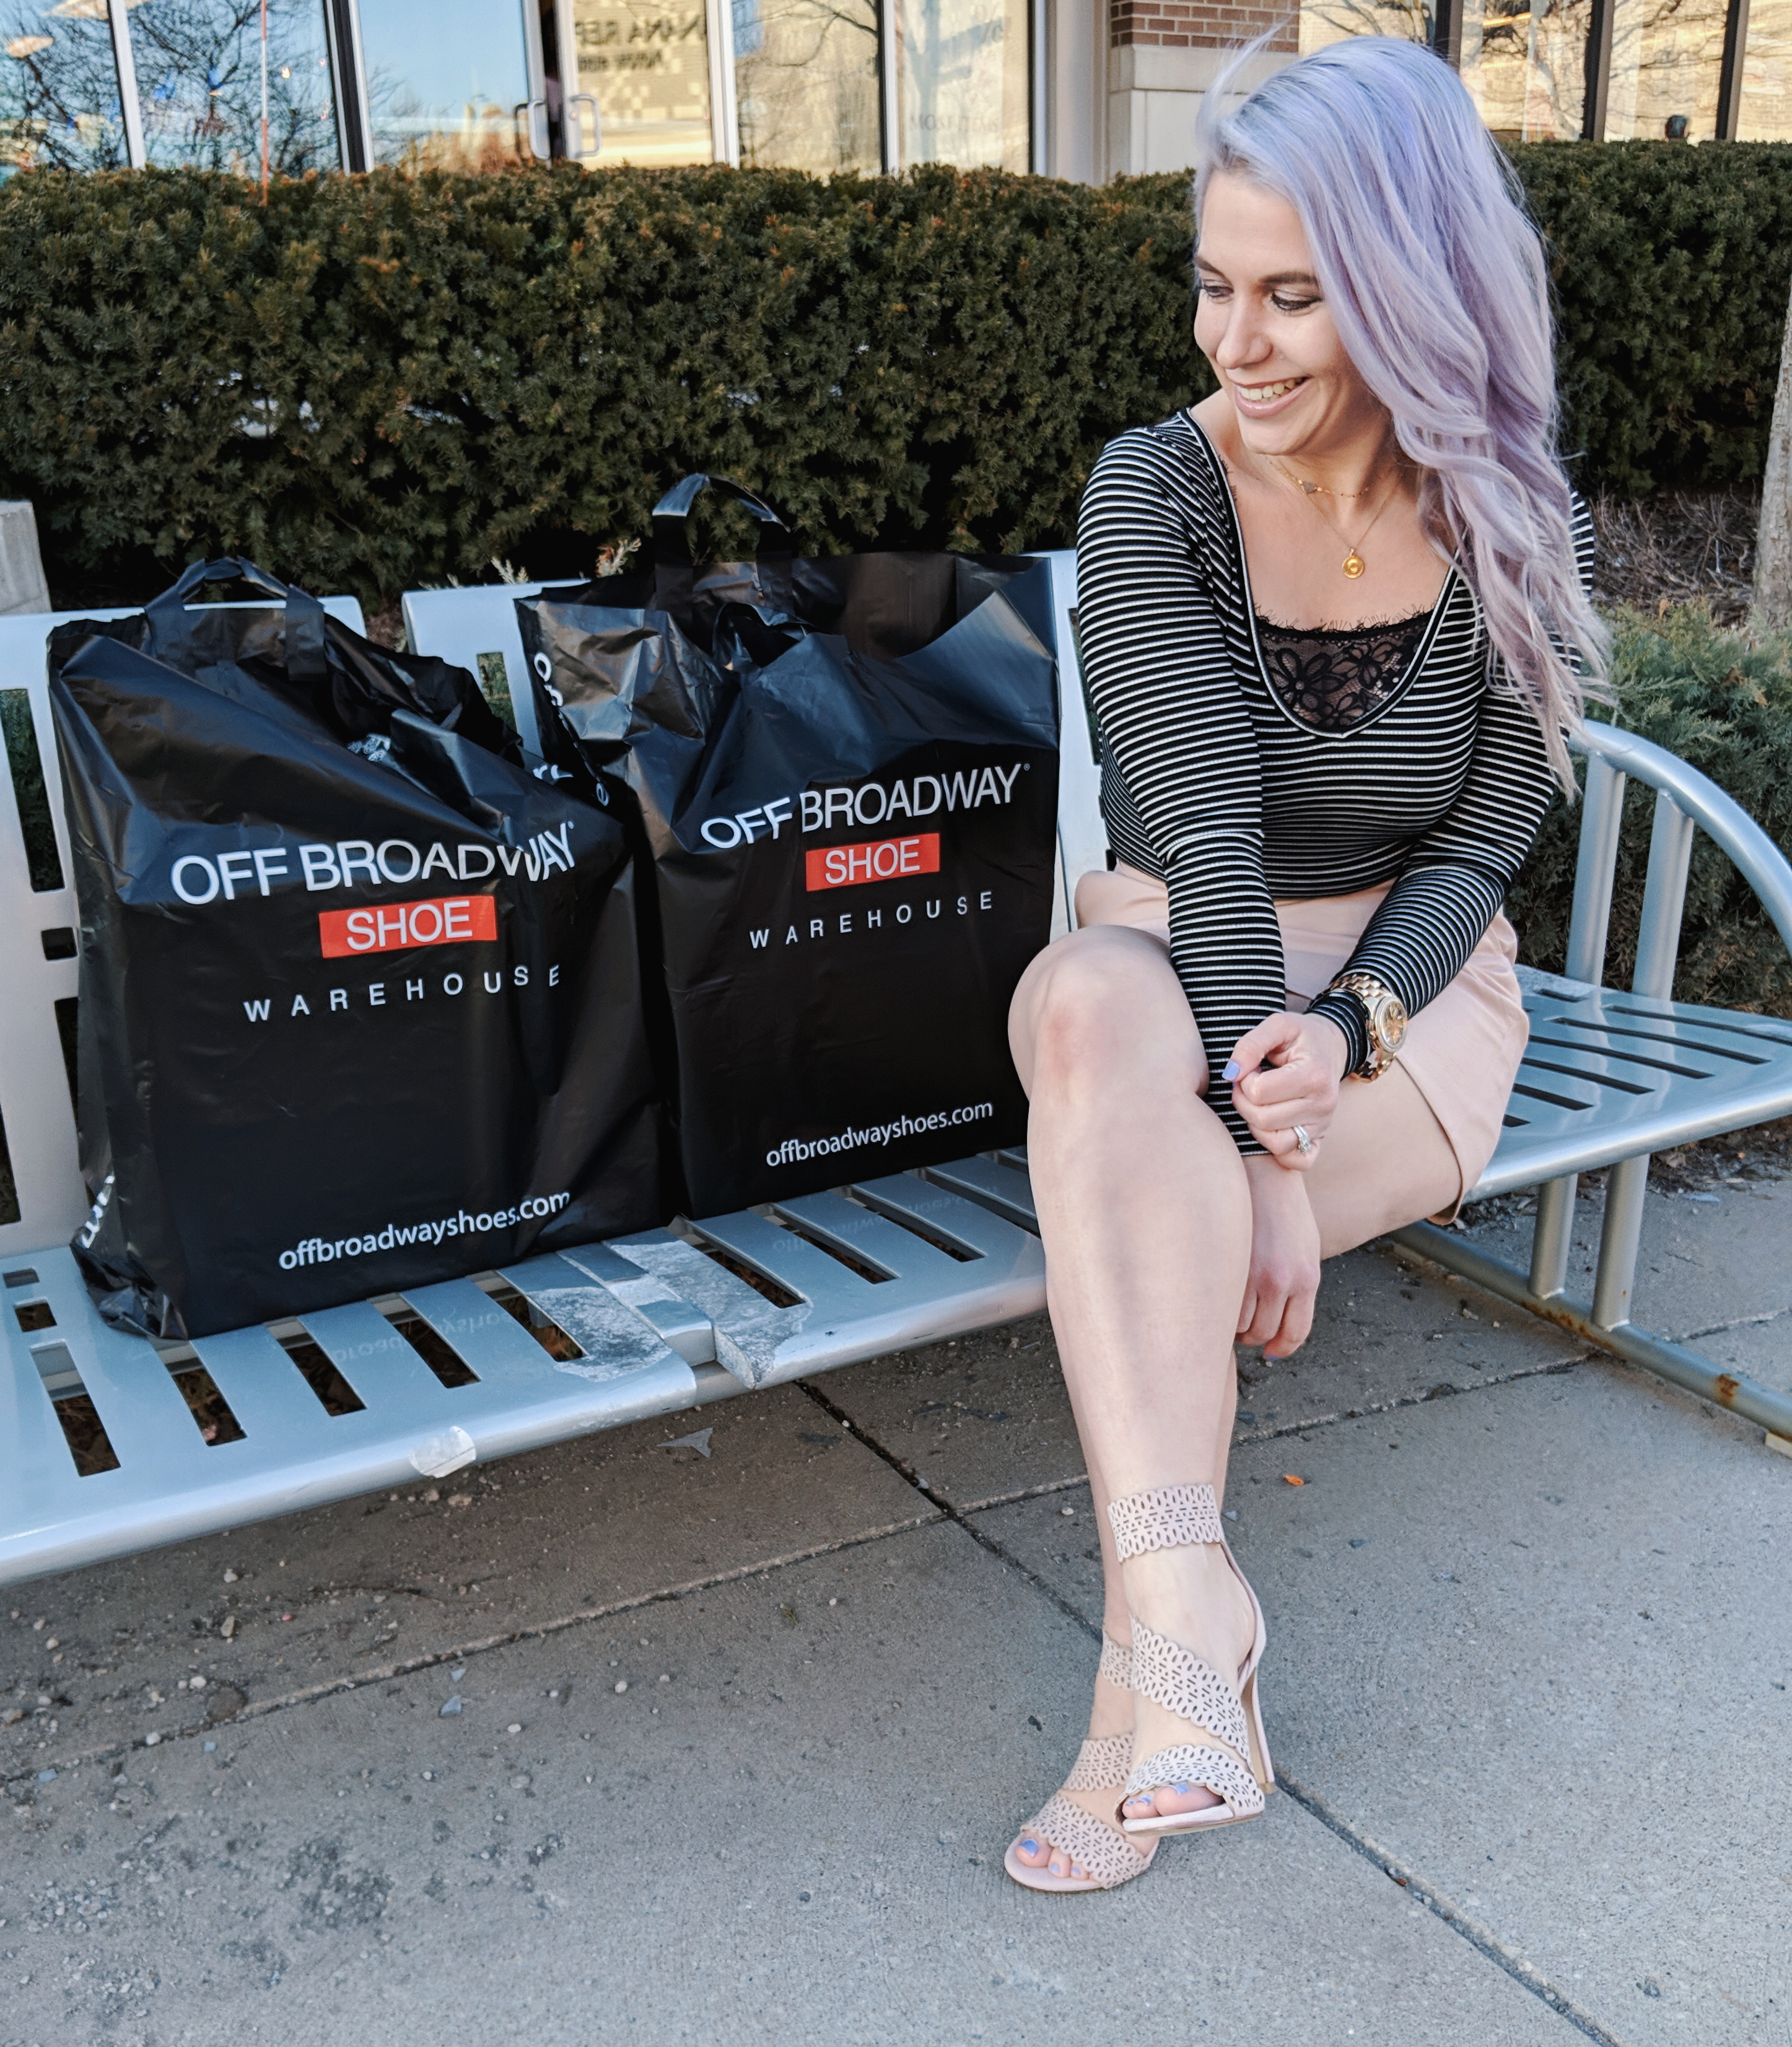 Cute Shoes for Spring 2019 - Where to find the best cute shoes for spring 2019! Kansas City fashion blogger Tricia Nibarger of COVET by tricia showcases the shoe selection at Off Broadway Shoes at Legends Outlets in Kansas City. (ad) Strappy nude sandals are paired with a pink leather mini skirt, black bodysuit, and cute bralette. #obshoes #fashion #style #fashionista #styleinspo